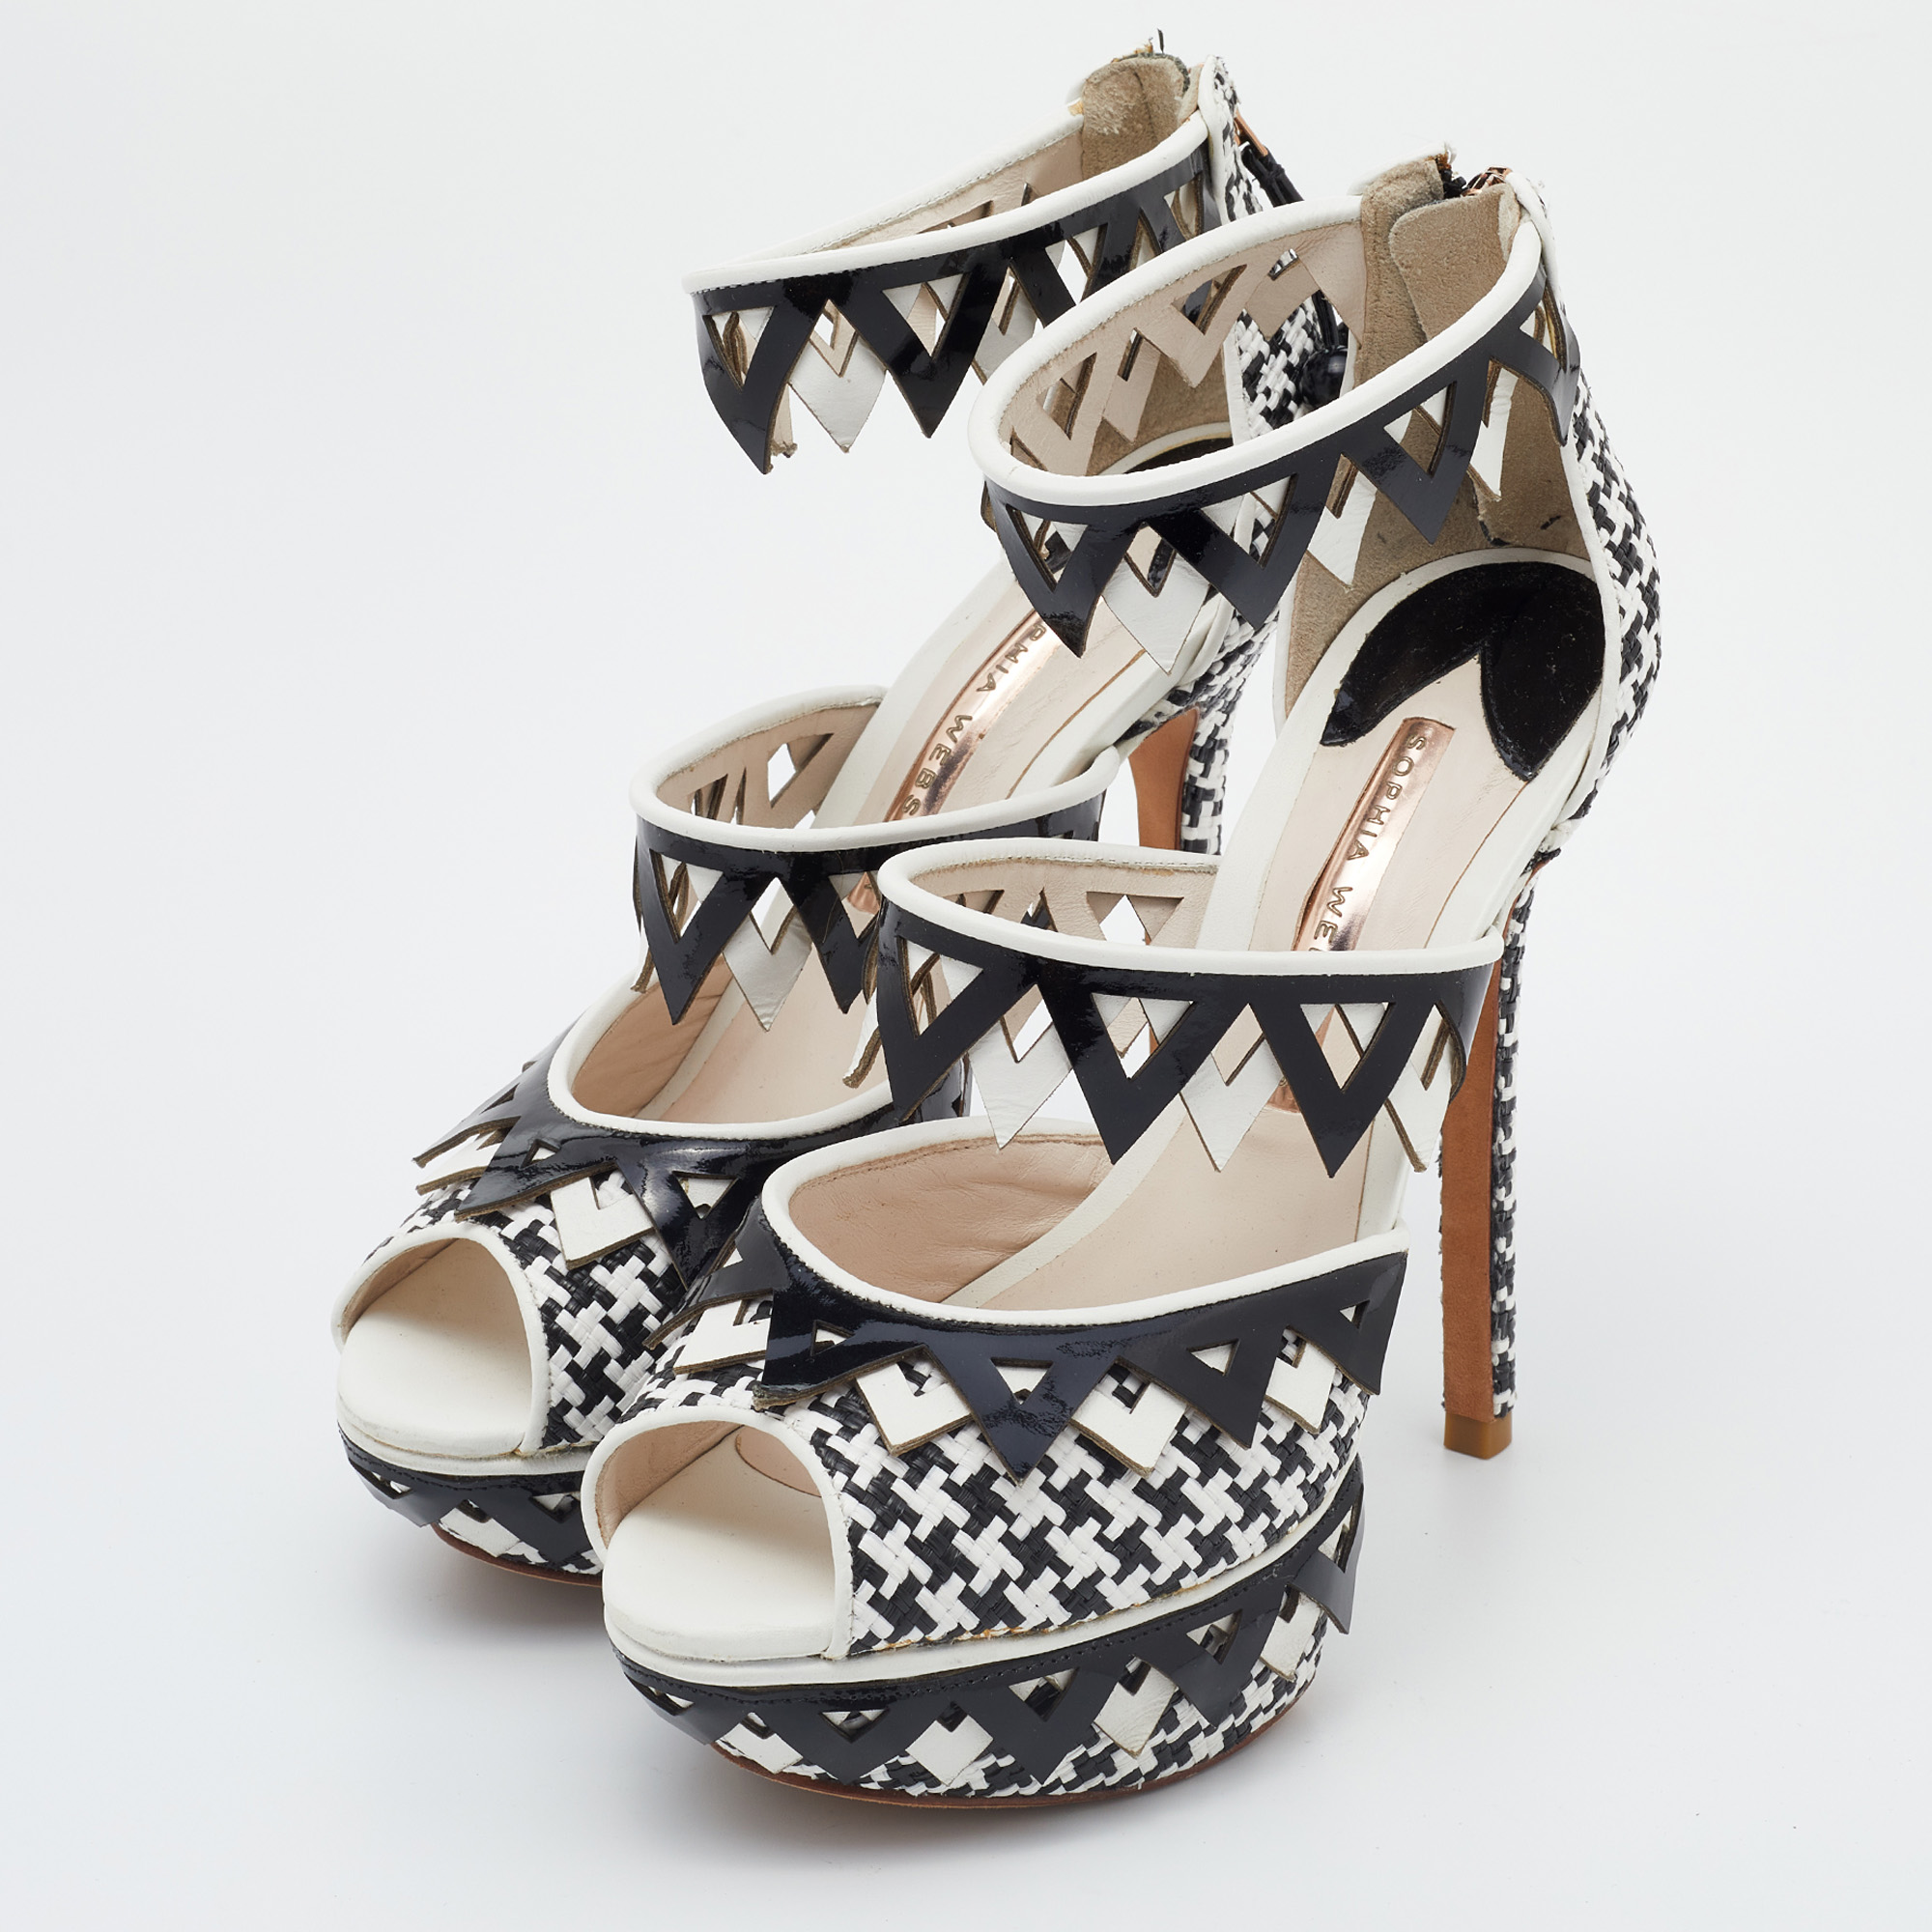   The Luxury Closet Sophia Webster Black/White Woven Raffia and Leather Platform Ankle Strap Sandals Size 36